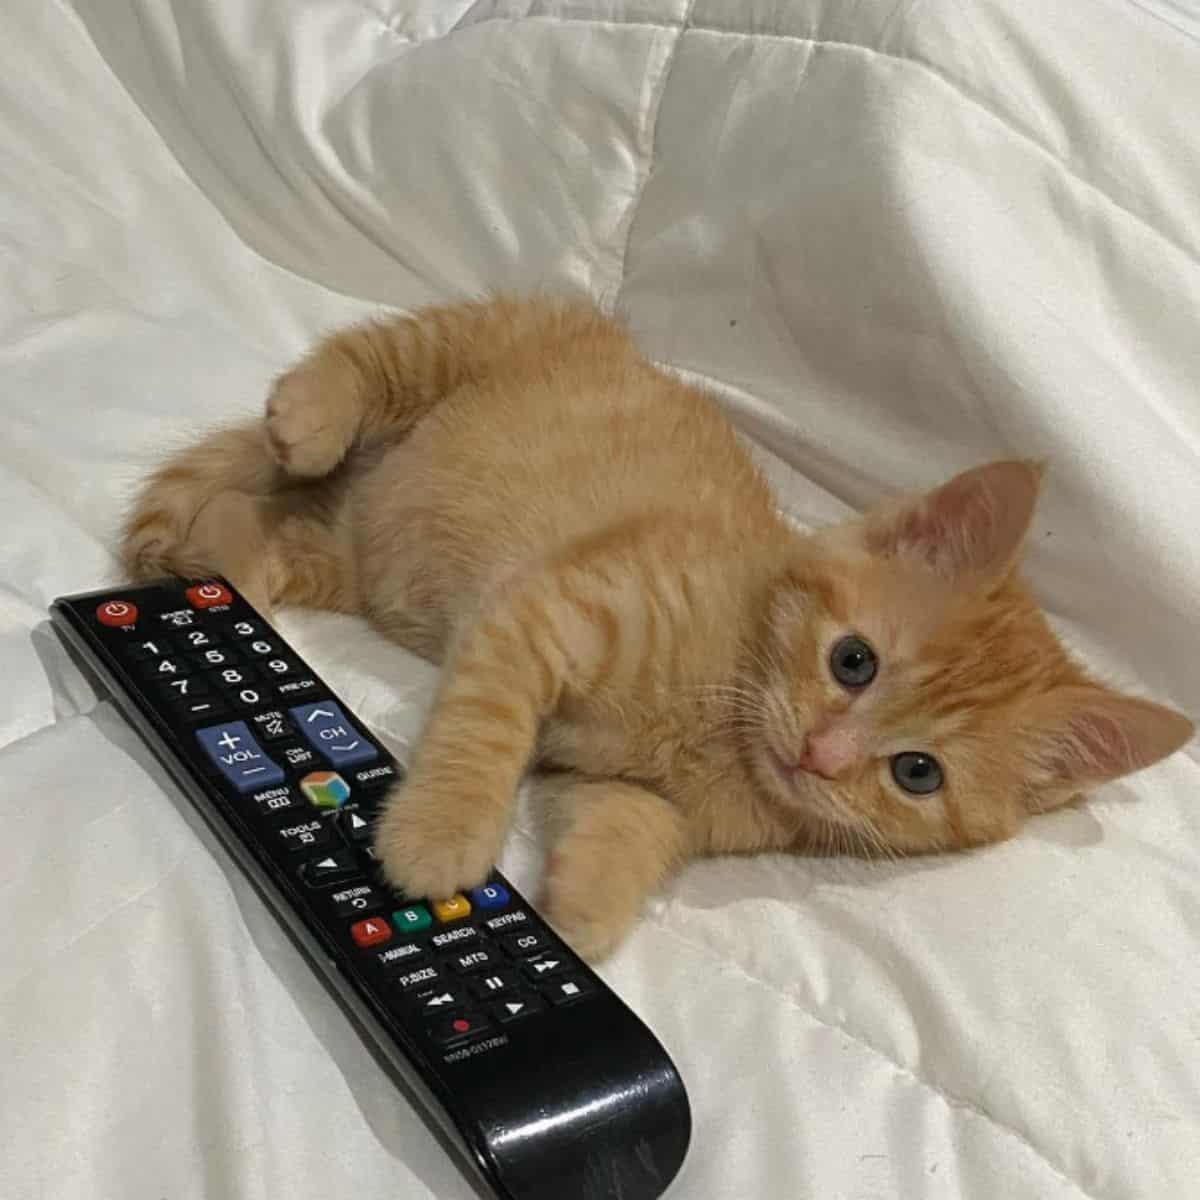 the cat holding a tv remote